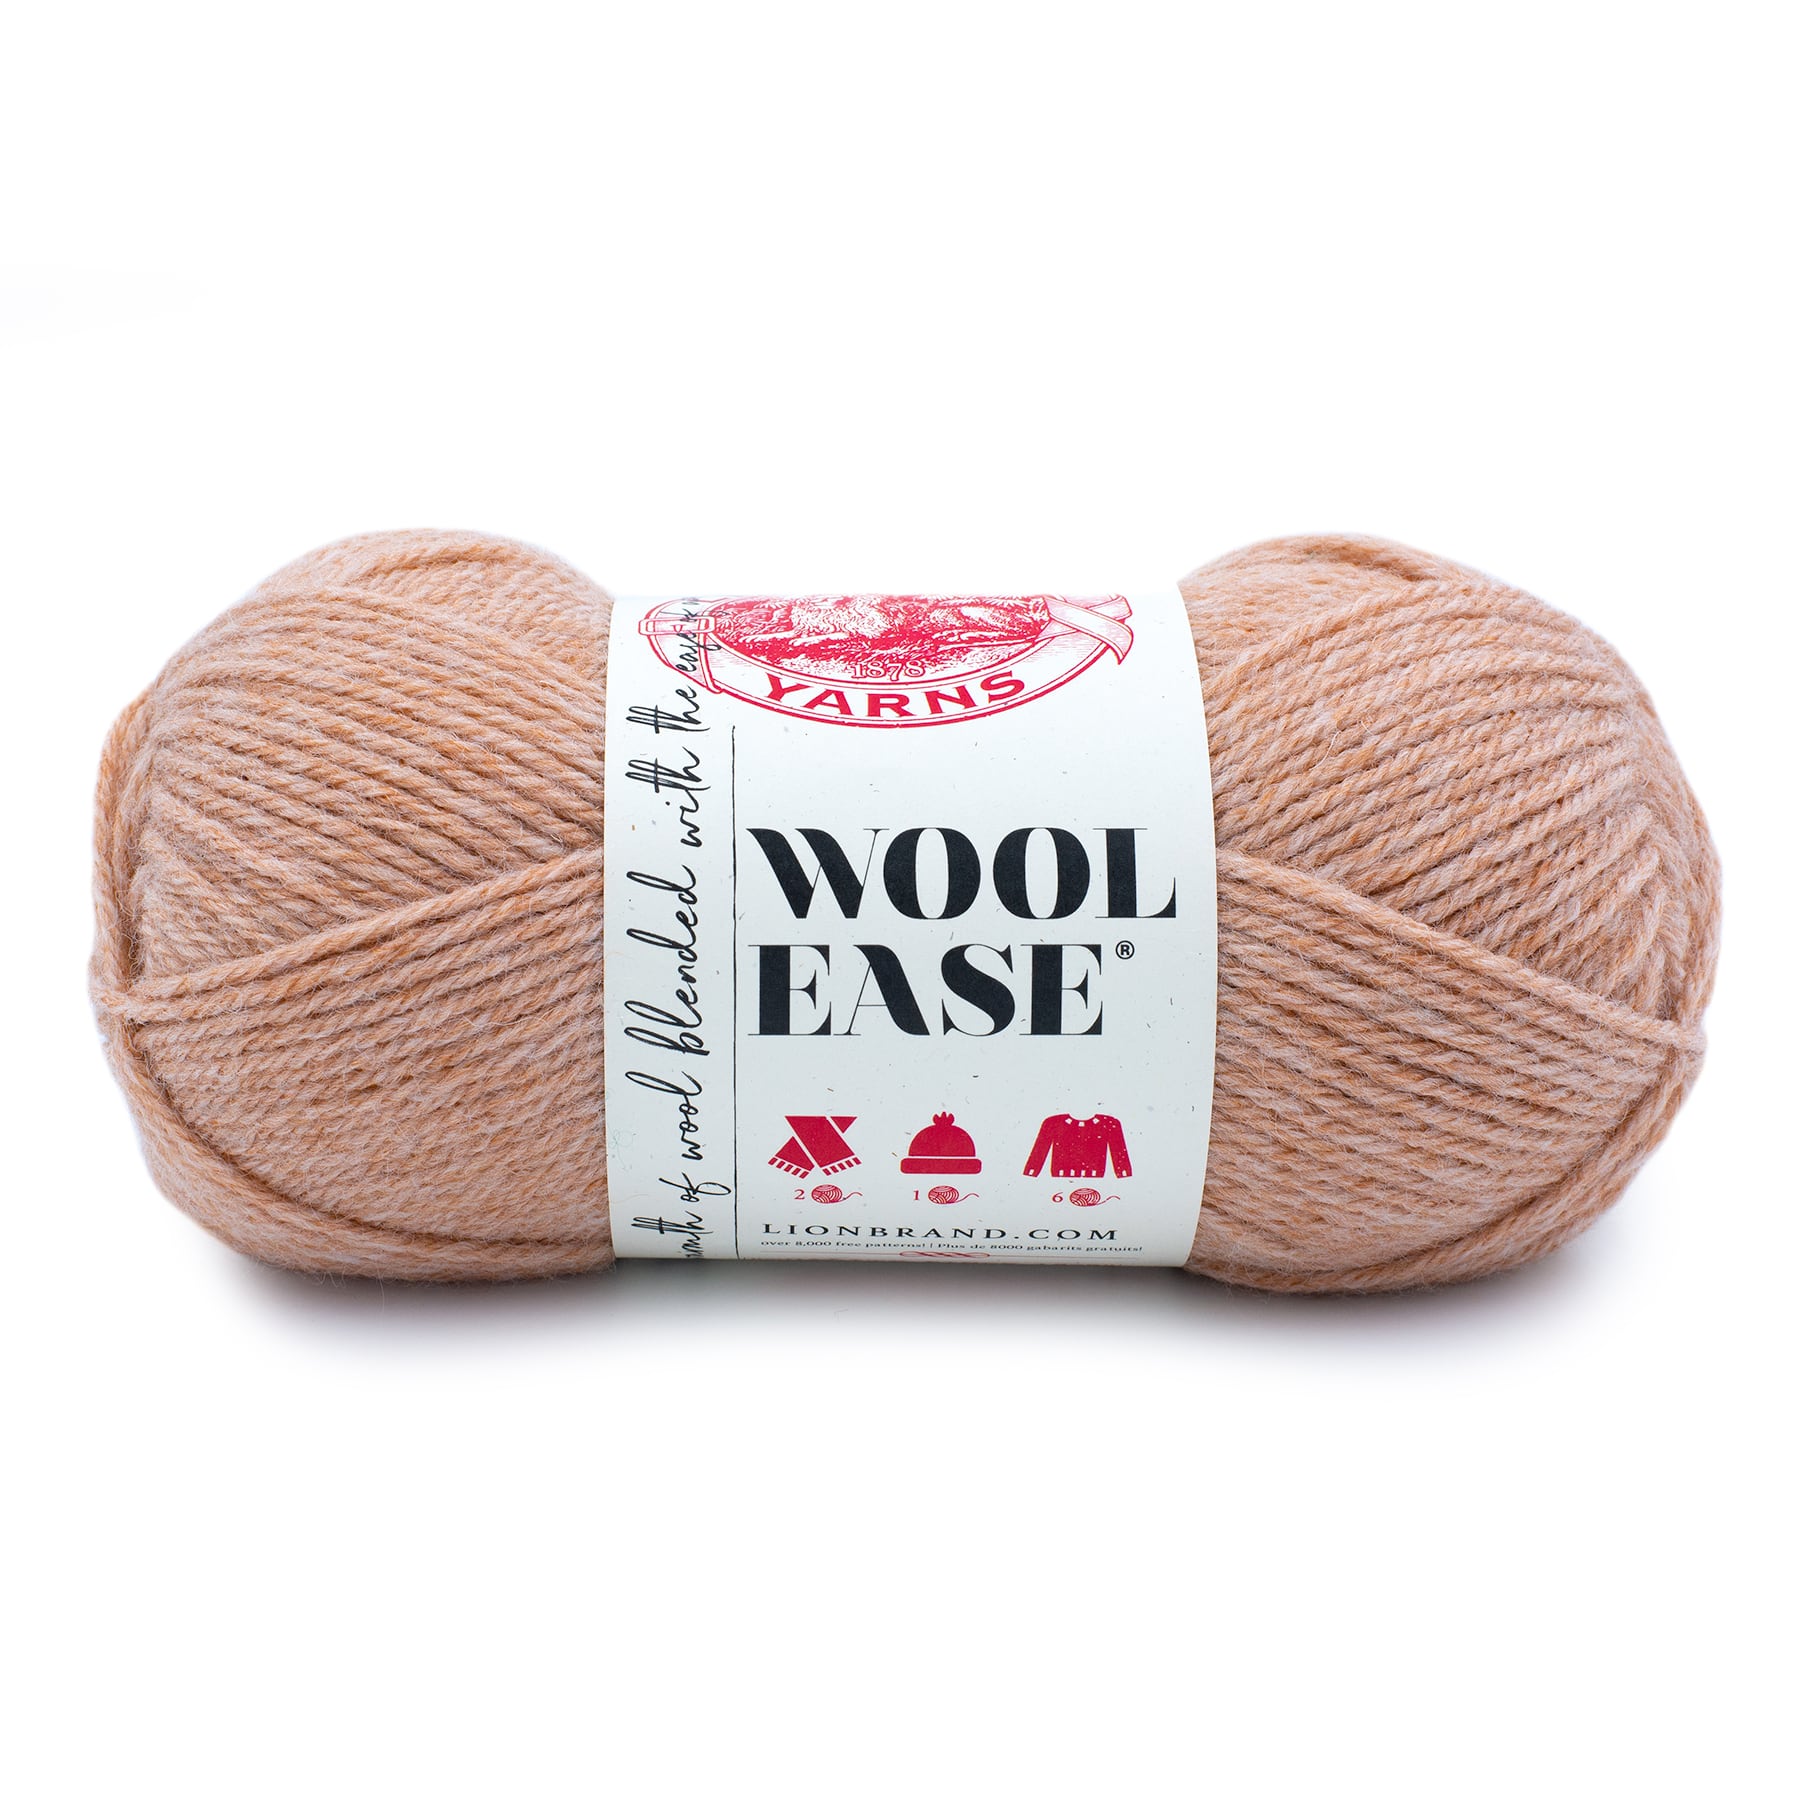 Lion Brand Wool-Ease Yarn -Black, 1 count - Foods Co.